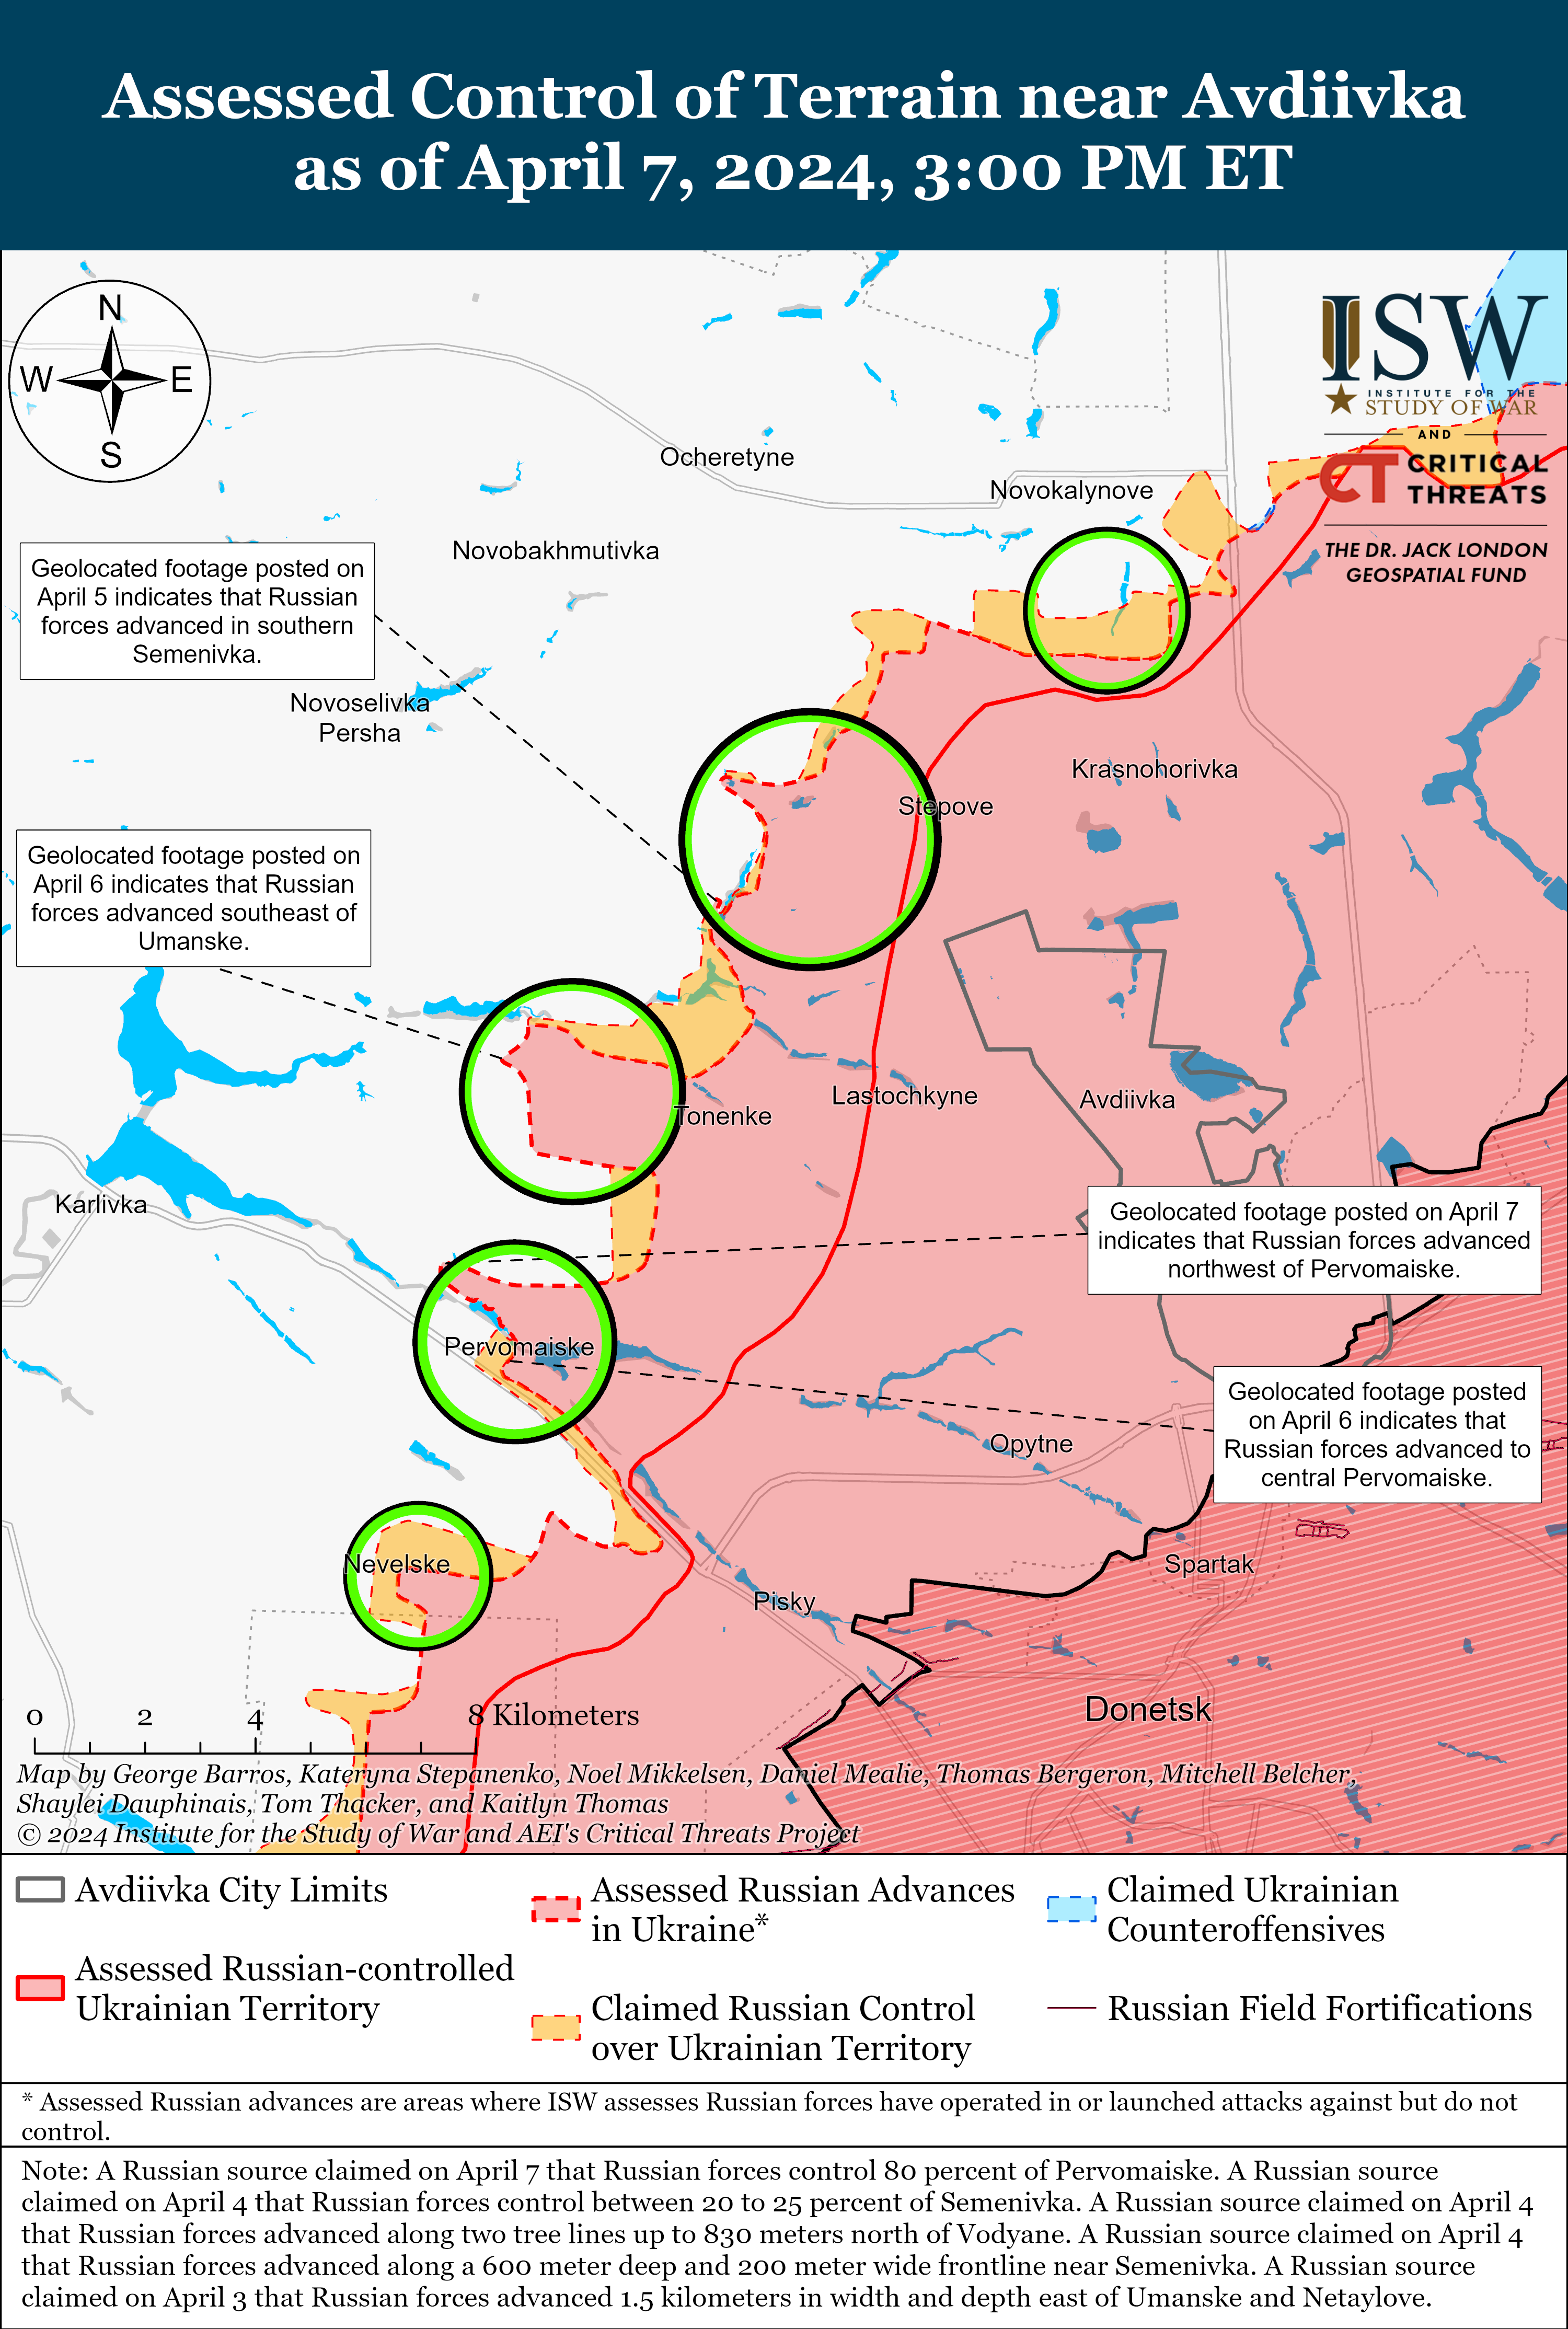 West_Of_Avdiivka_Battle_Map_Draft_April_7_2024.png